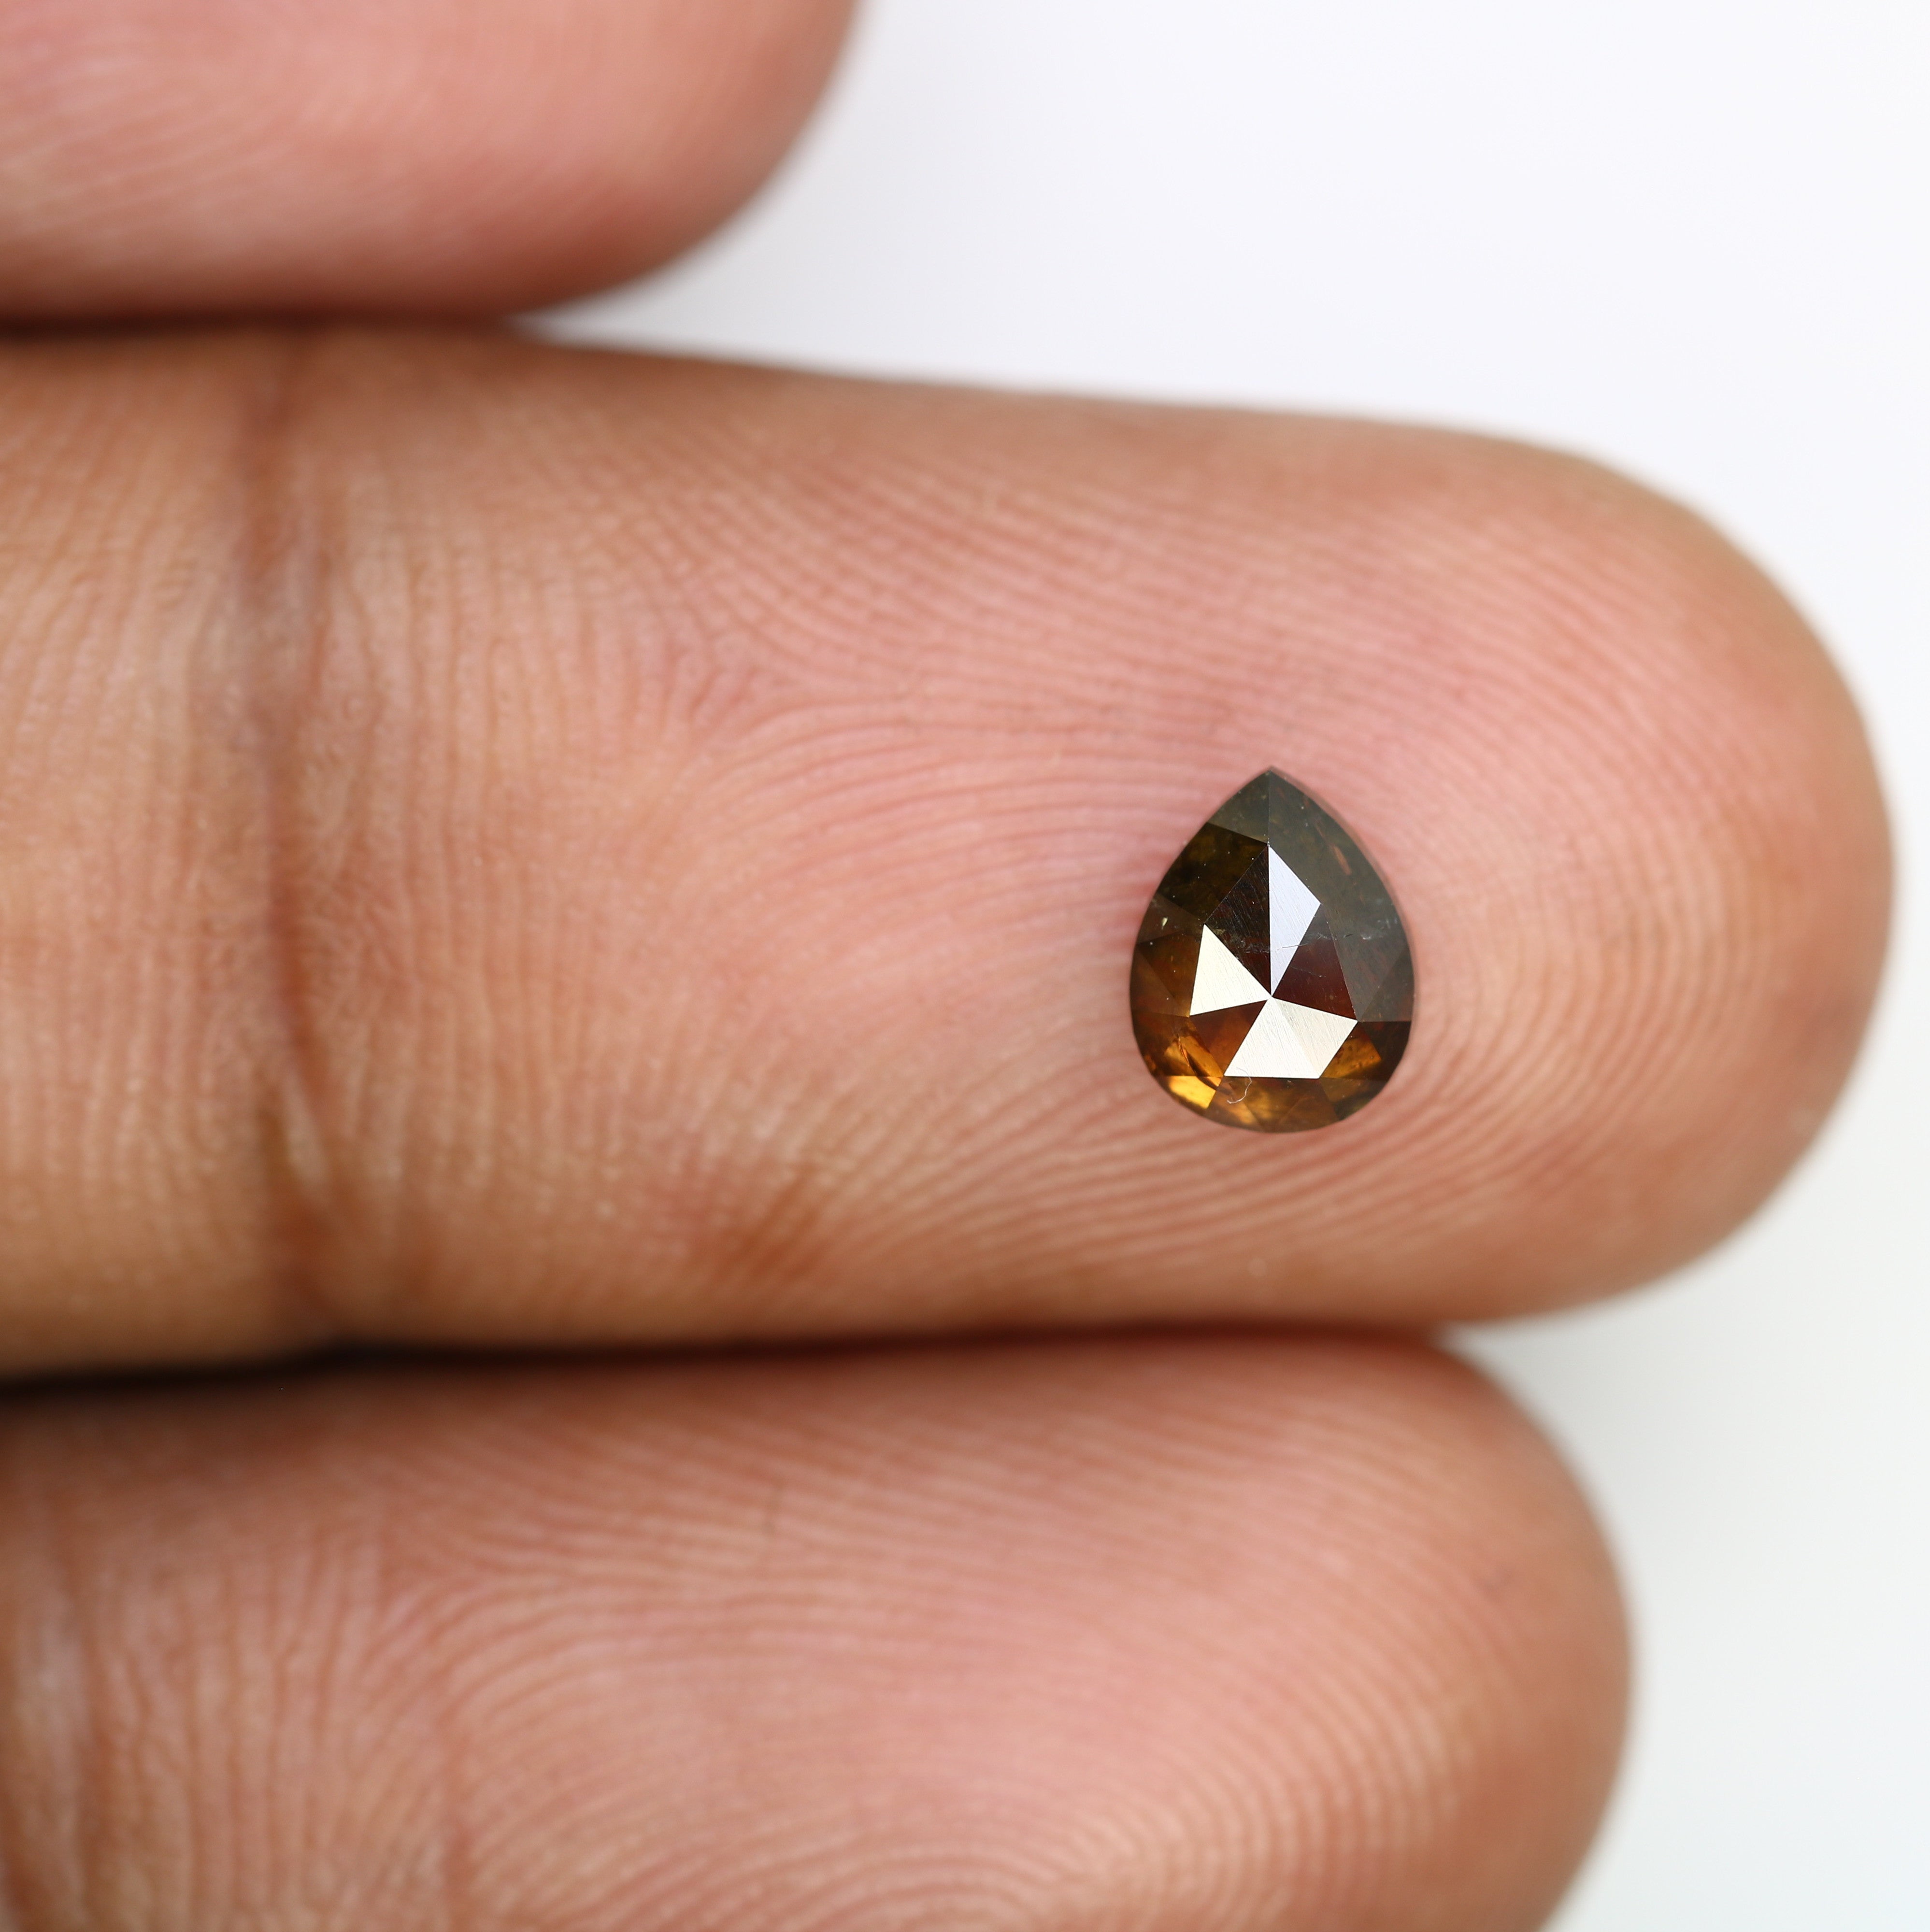 0.86 Carat 6.5MM Pear Shaped Loose Fancy Brown Diamond For Galaxy Ring